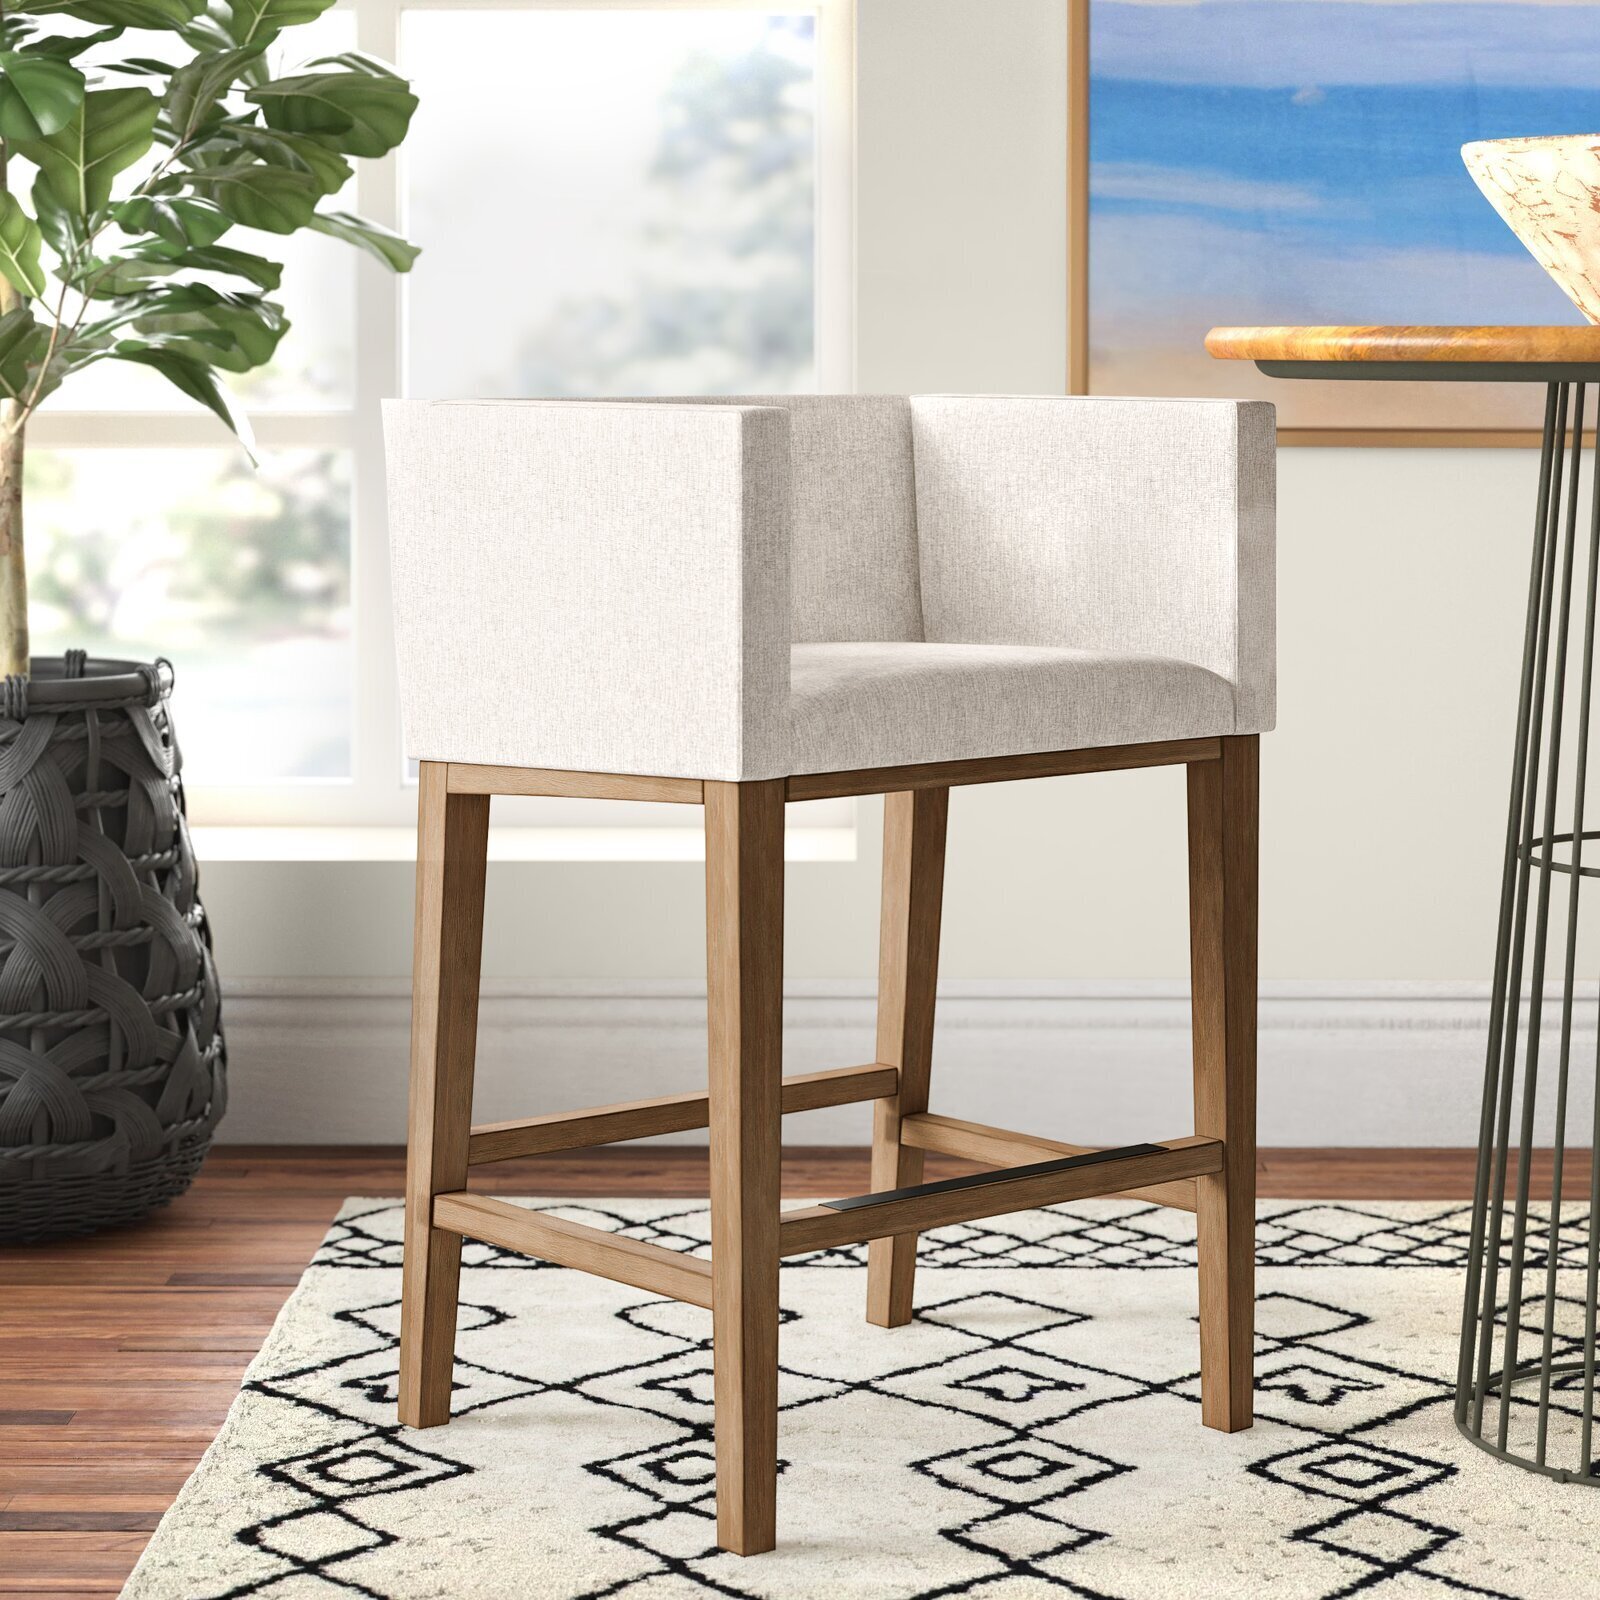 Transitional Stool in a Simple Square